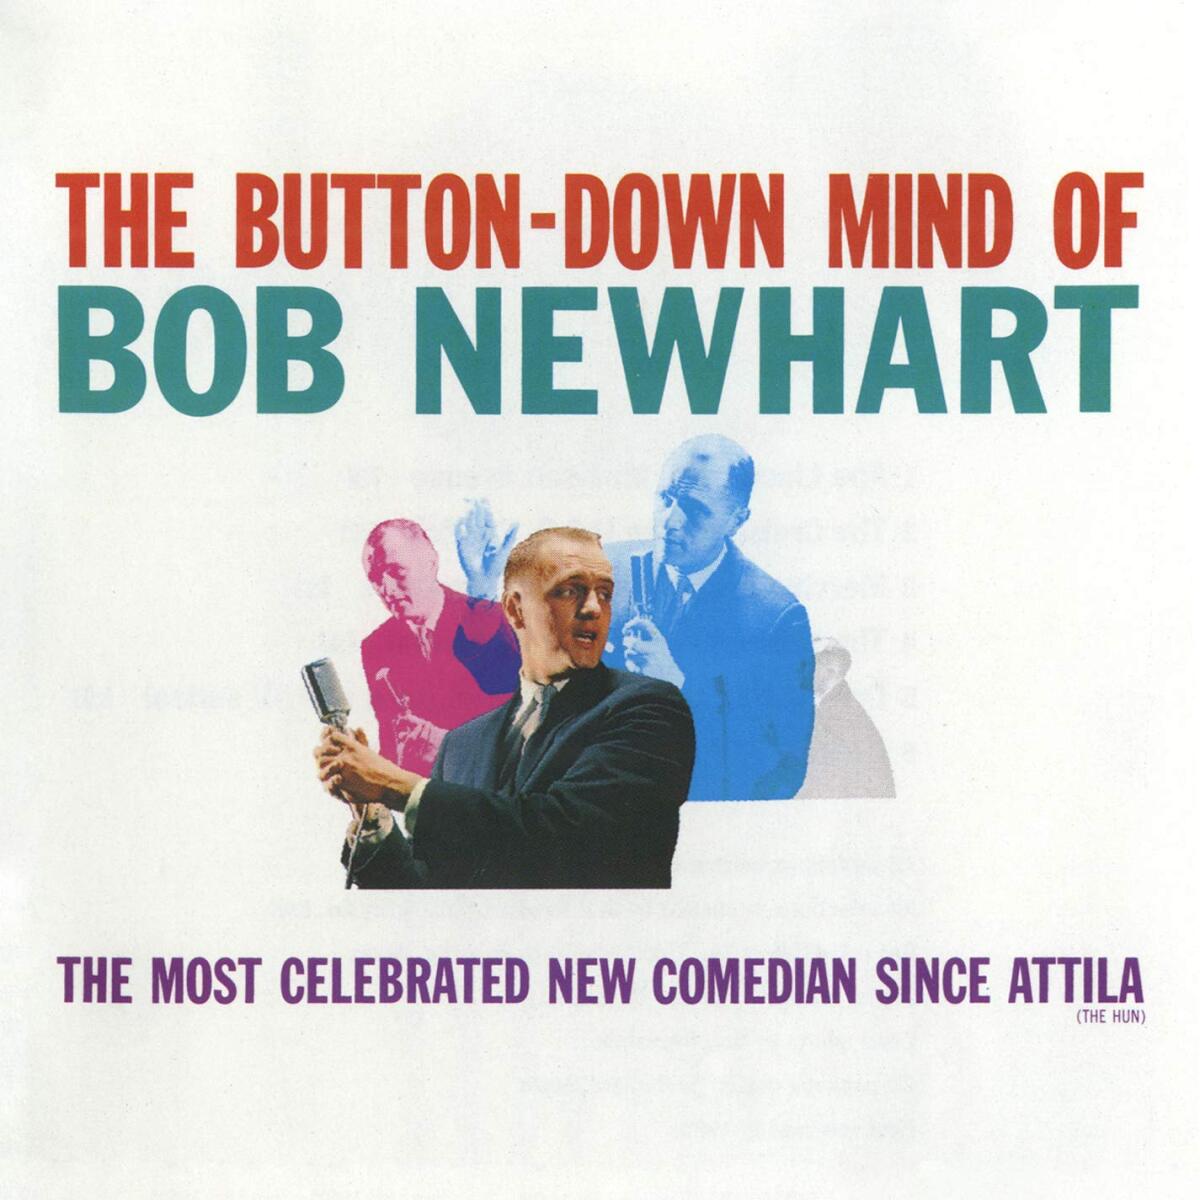 Bob Newhart wanted to title his 1960 debut album "The Most Celebrated New Comedian Since Attila the Hun." He was over-ruled by his record company, who opted for "The Button-Down Mind of Bob Newhart" instead.